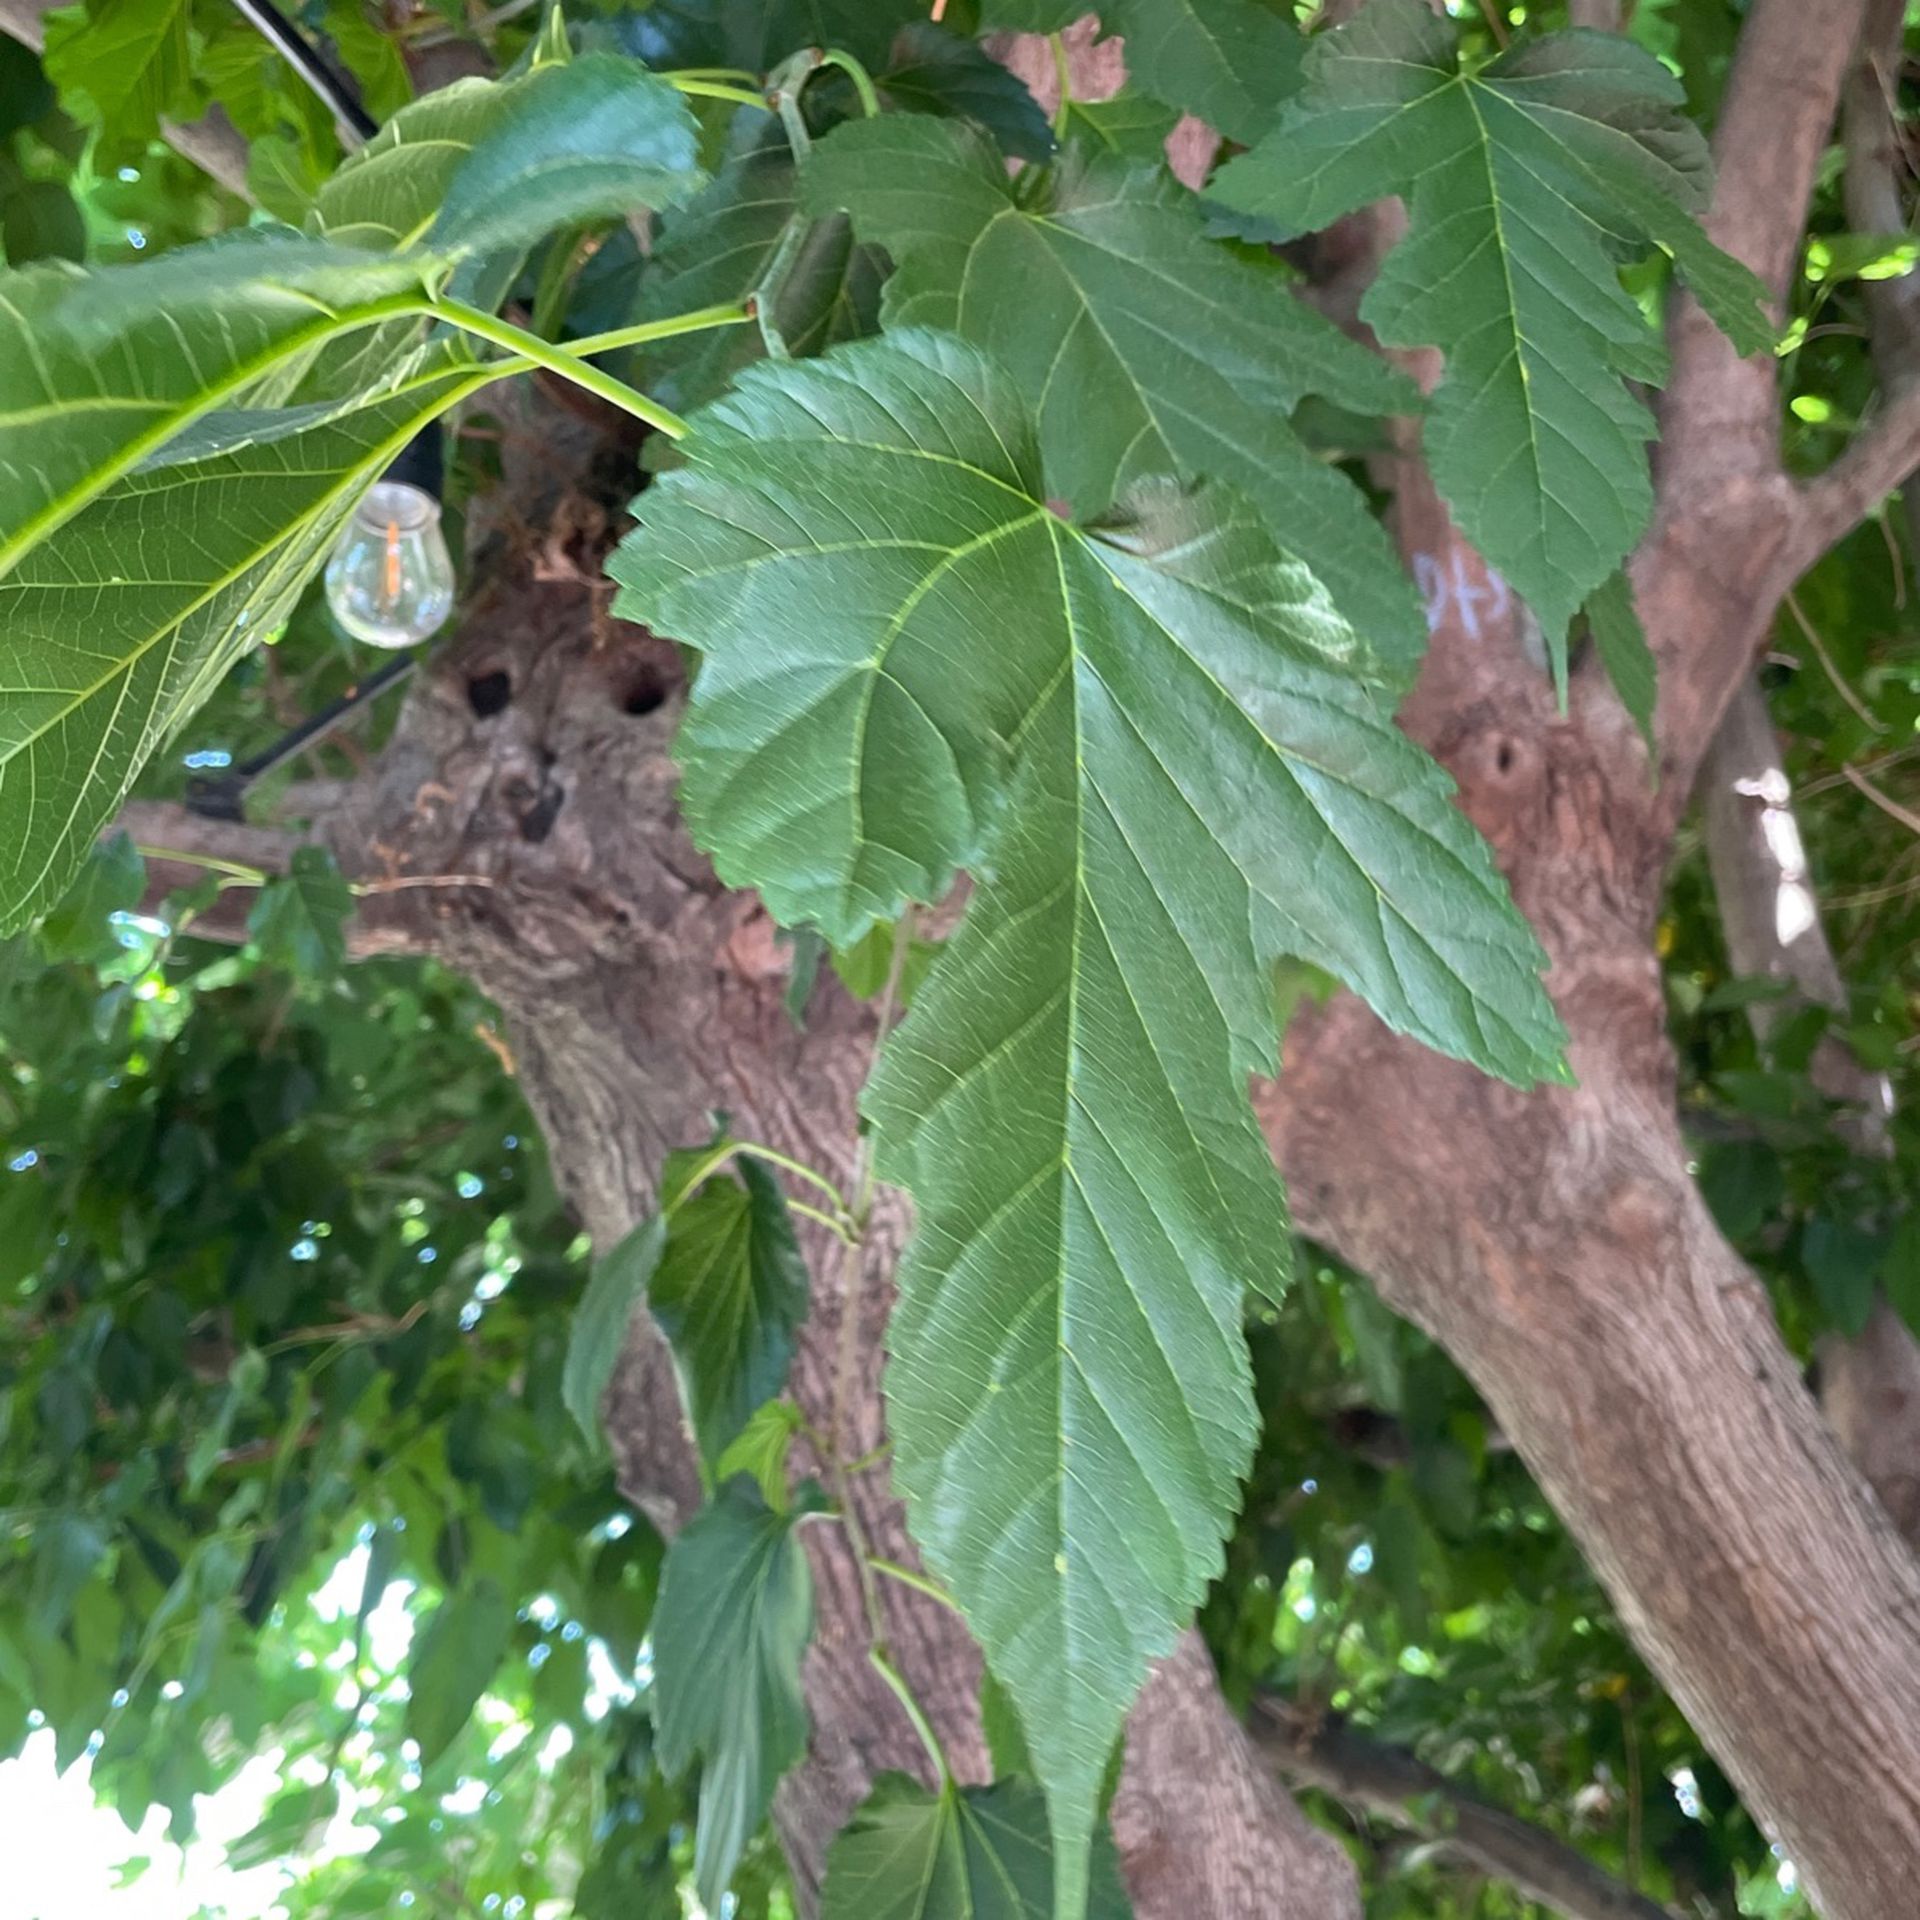 Mulberry leaves